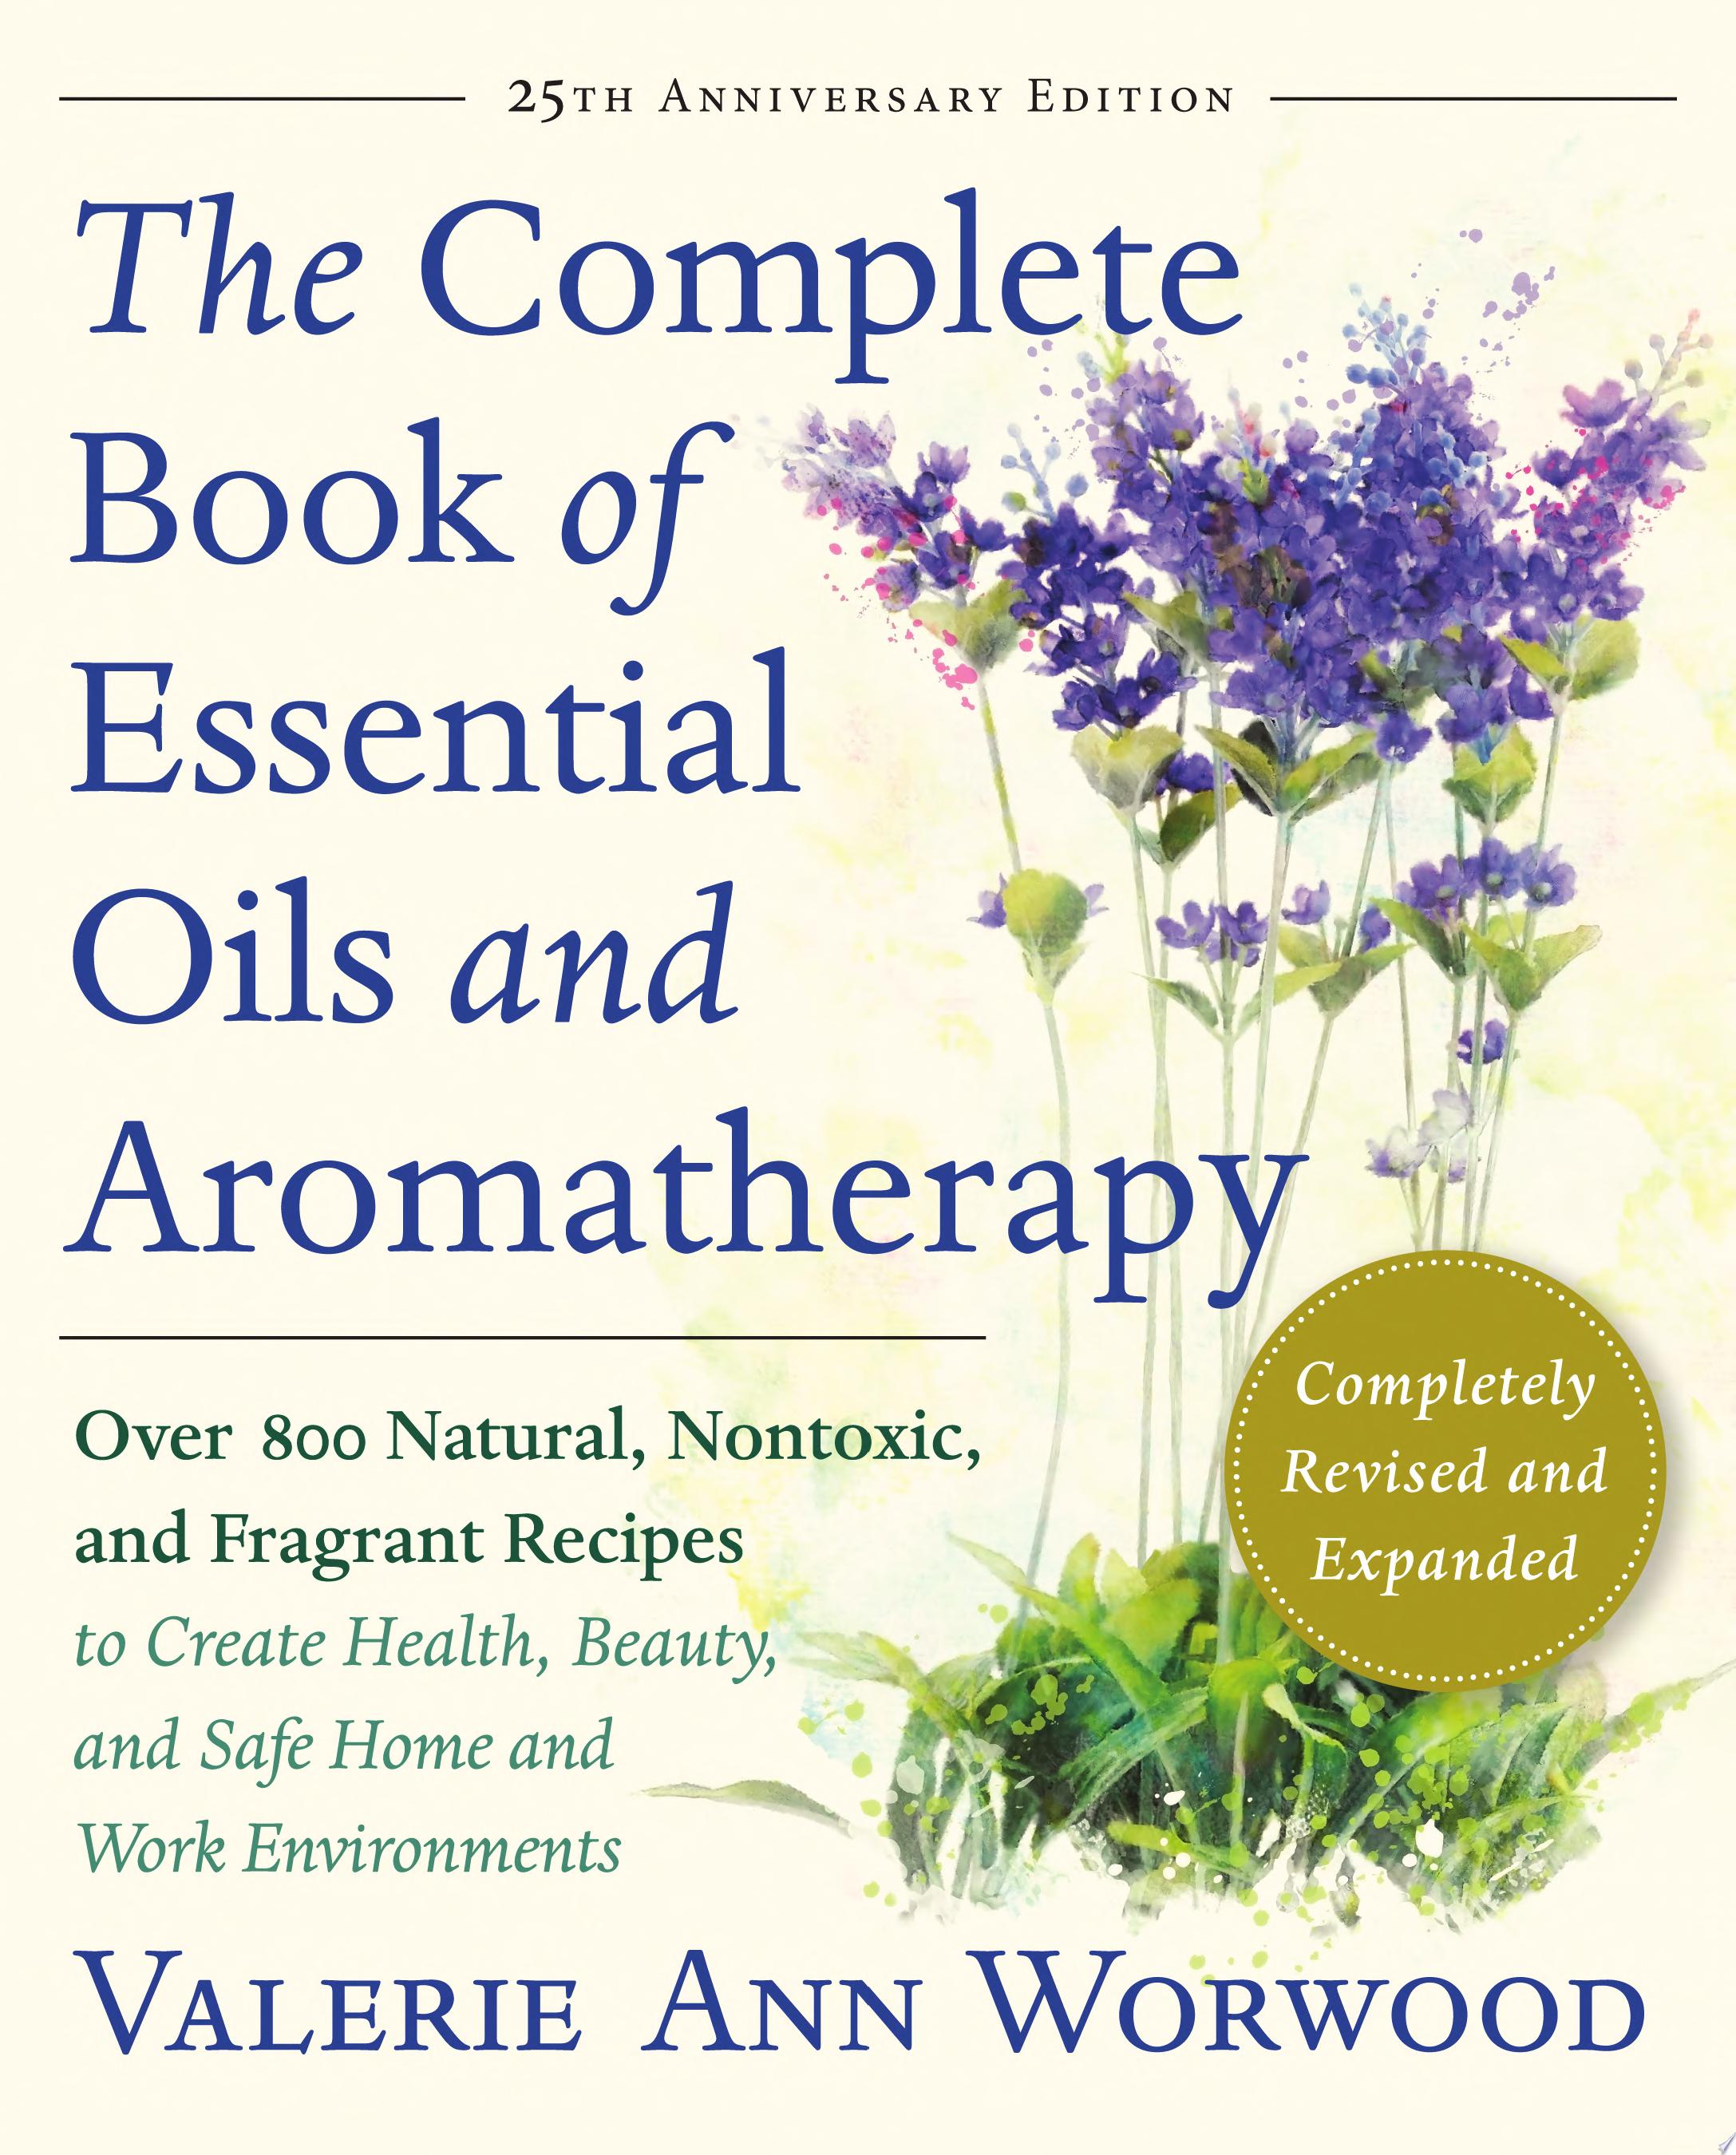 Image for "The Complete Book of Essential Oils and Aromatherapy, Revised and Expanded"